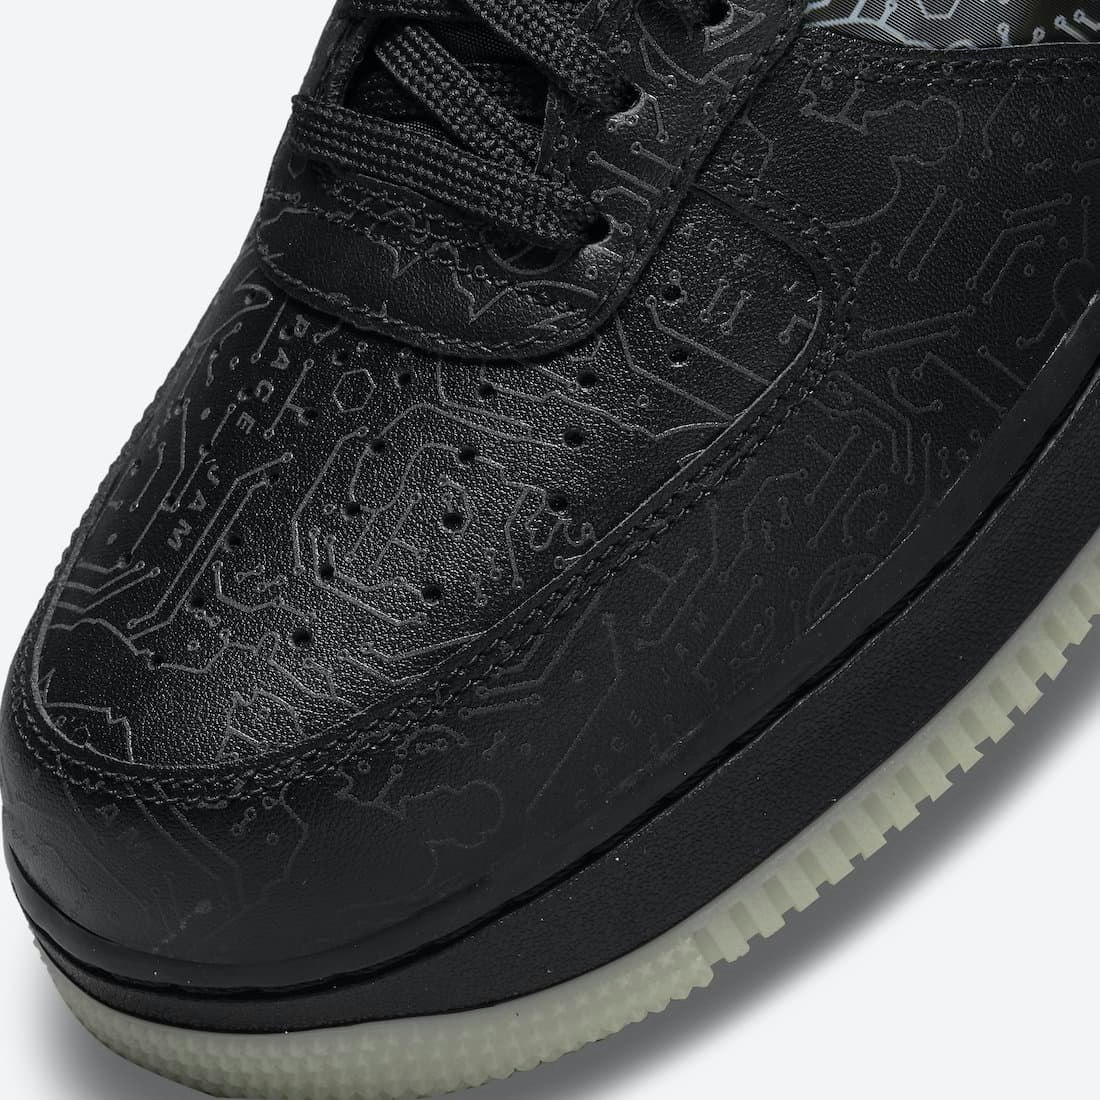 Space Jam x Nike Air Force 1 Low “Computer Chip”